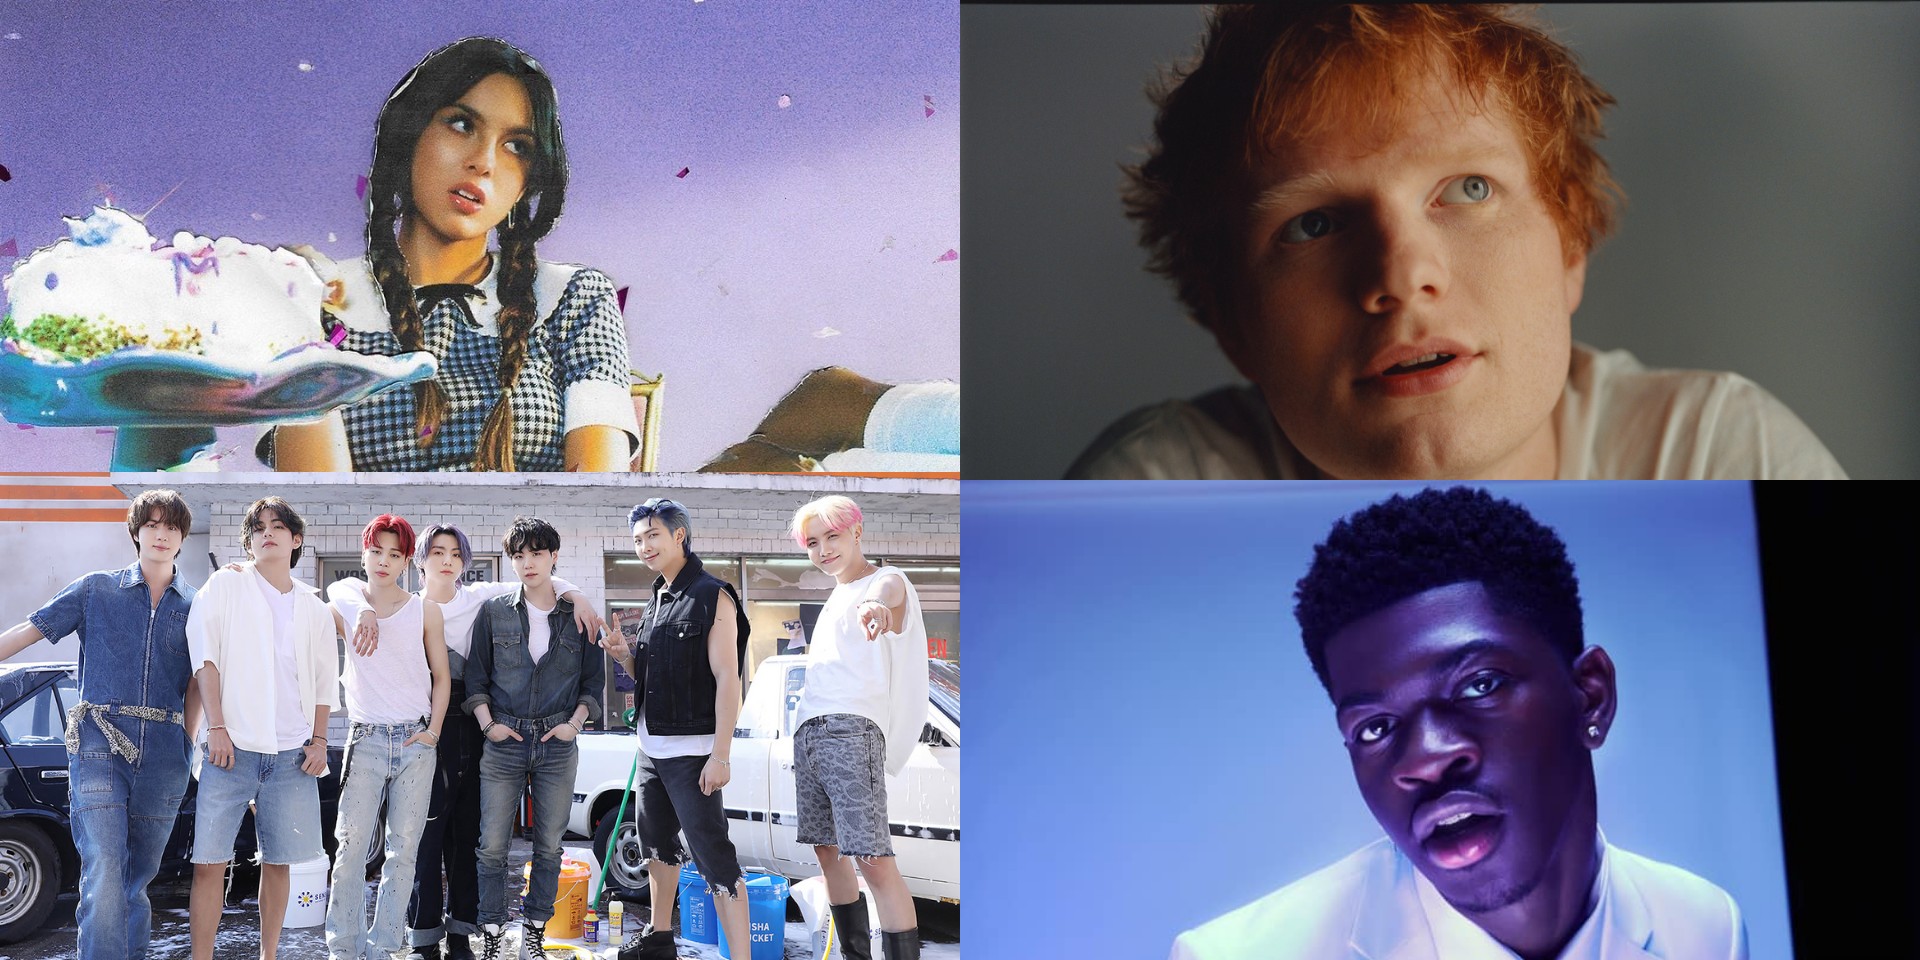 Hits by Olivia Rodrigo, BTS, Lil Nas X, Ed Sheeran, and more are Spotify’s top songs of the summer